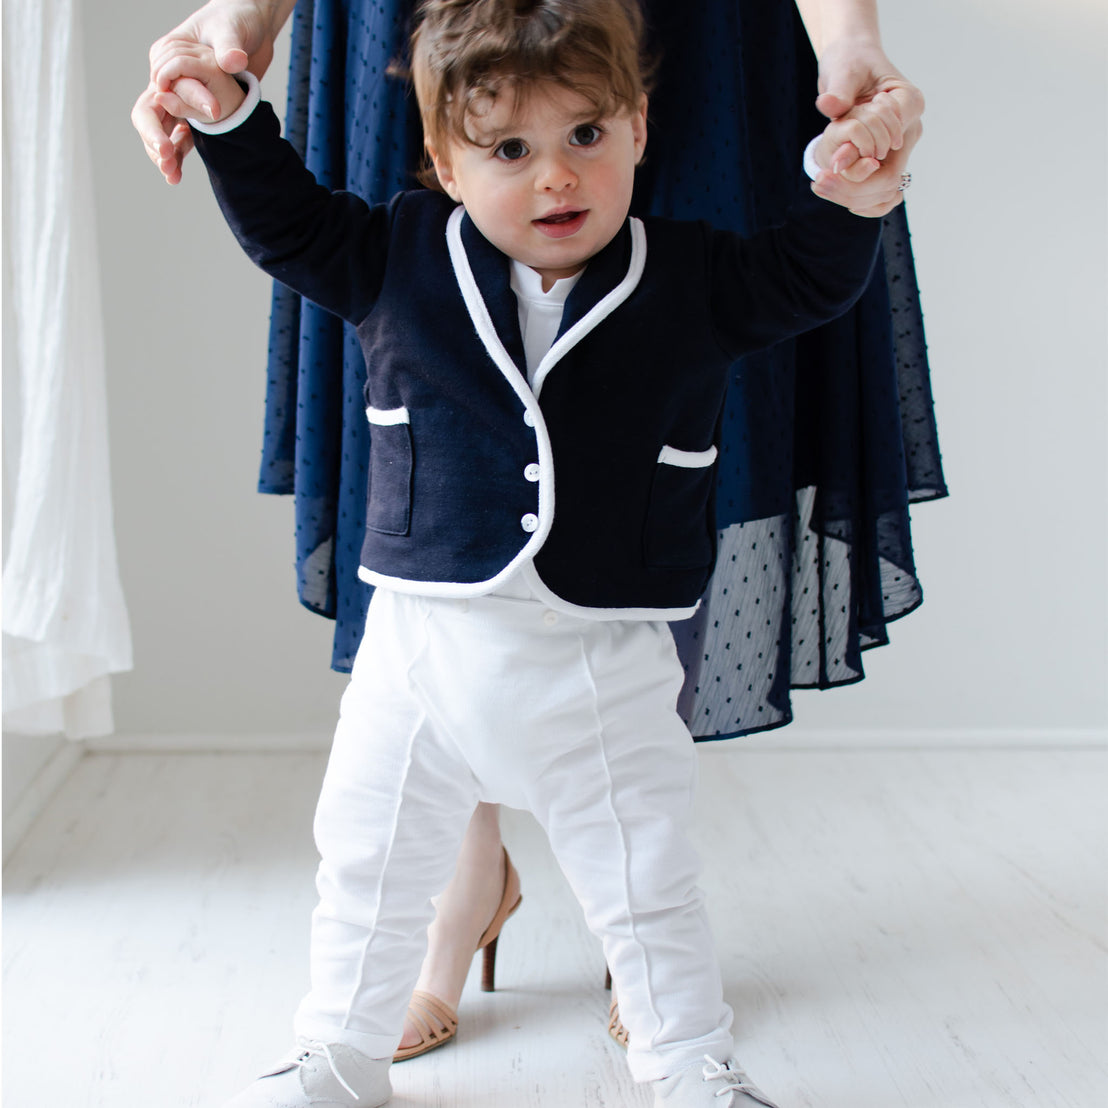 Baby boy holding on to his mother's hands. He is wearing the Elliott 3-Piece Suit, including the jacket, pants, and onesie.